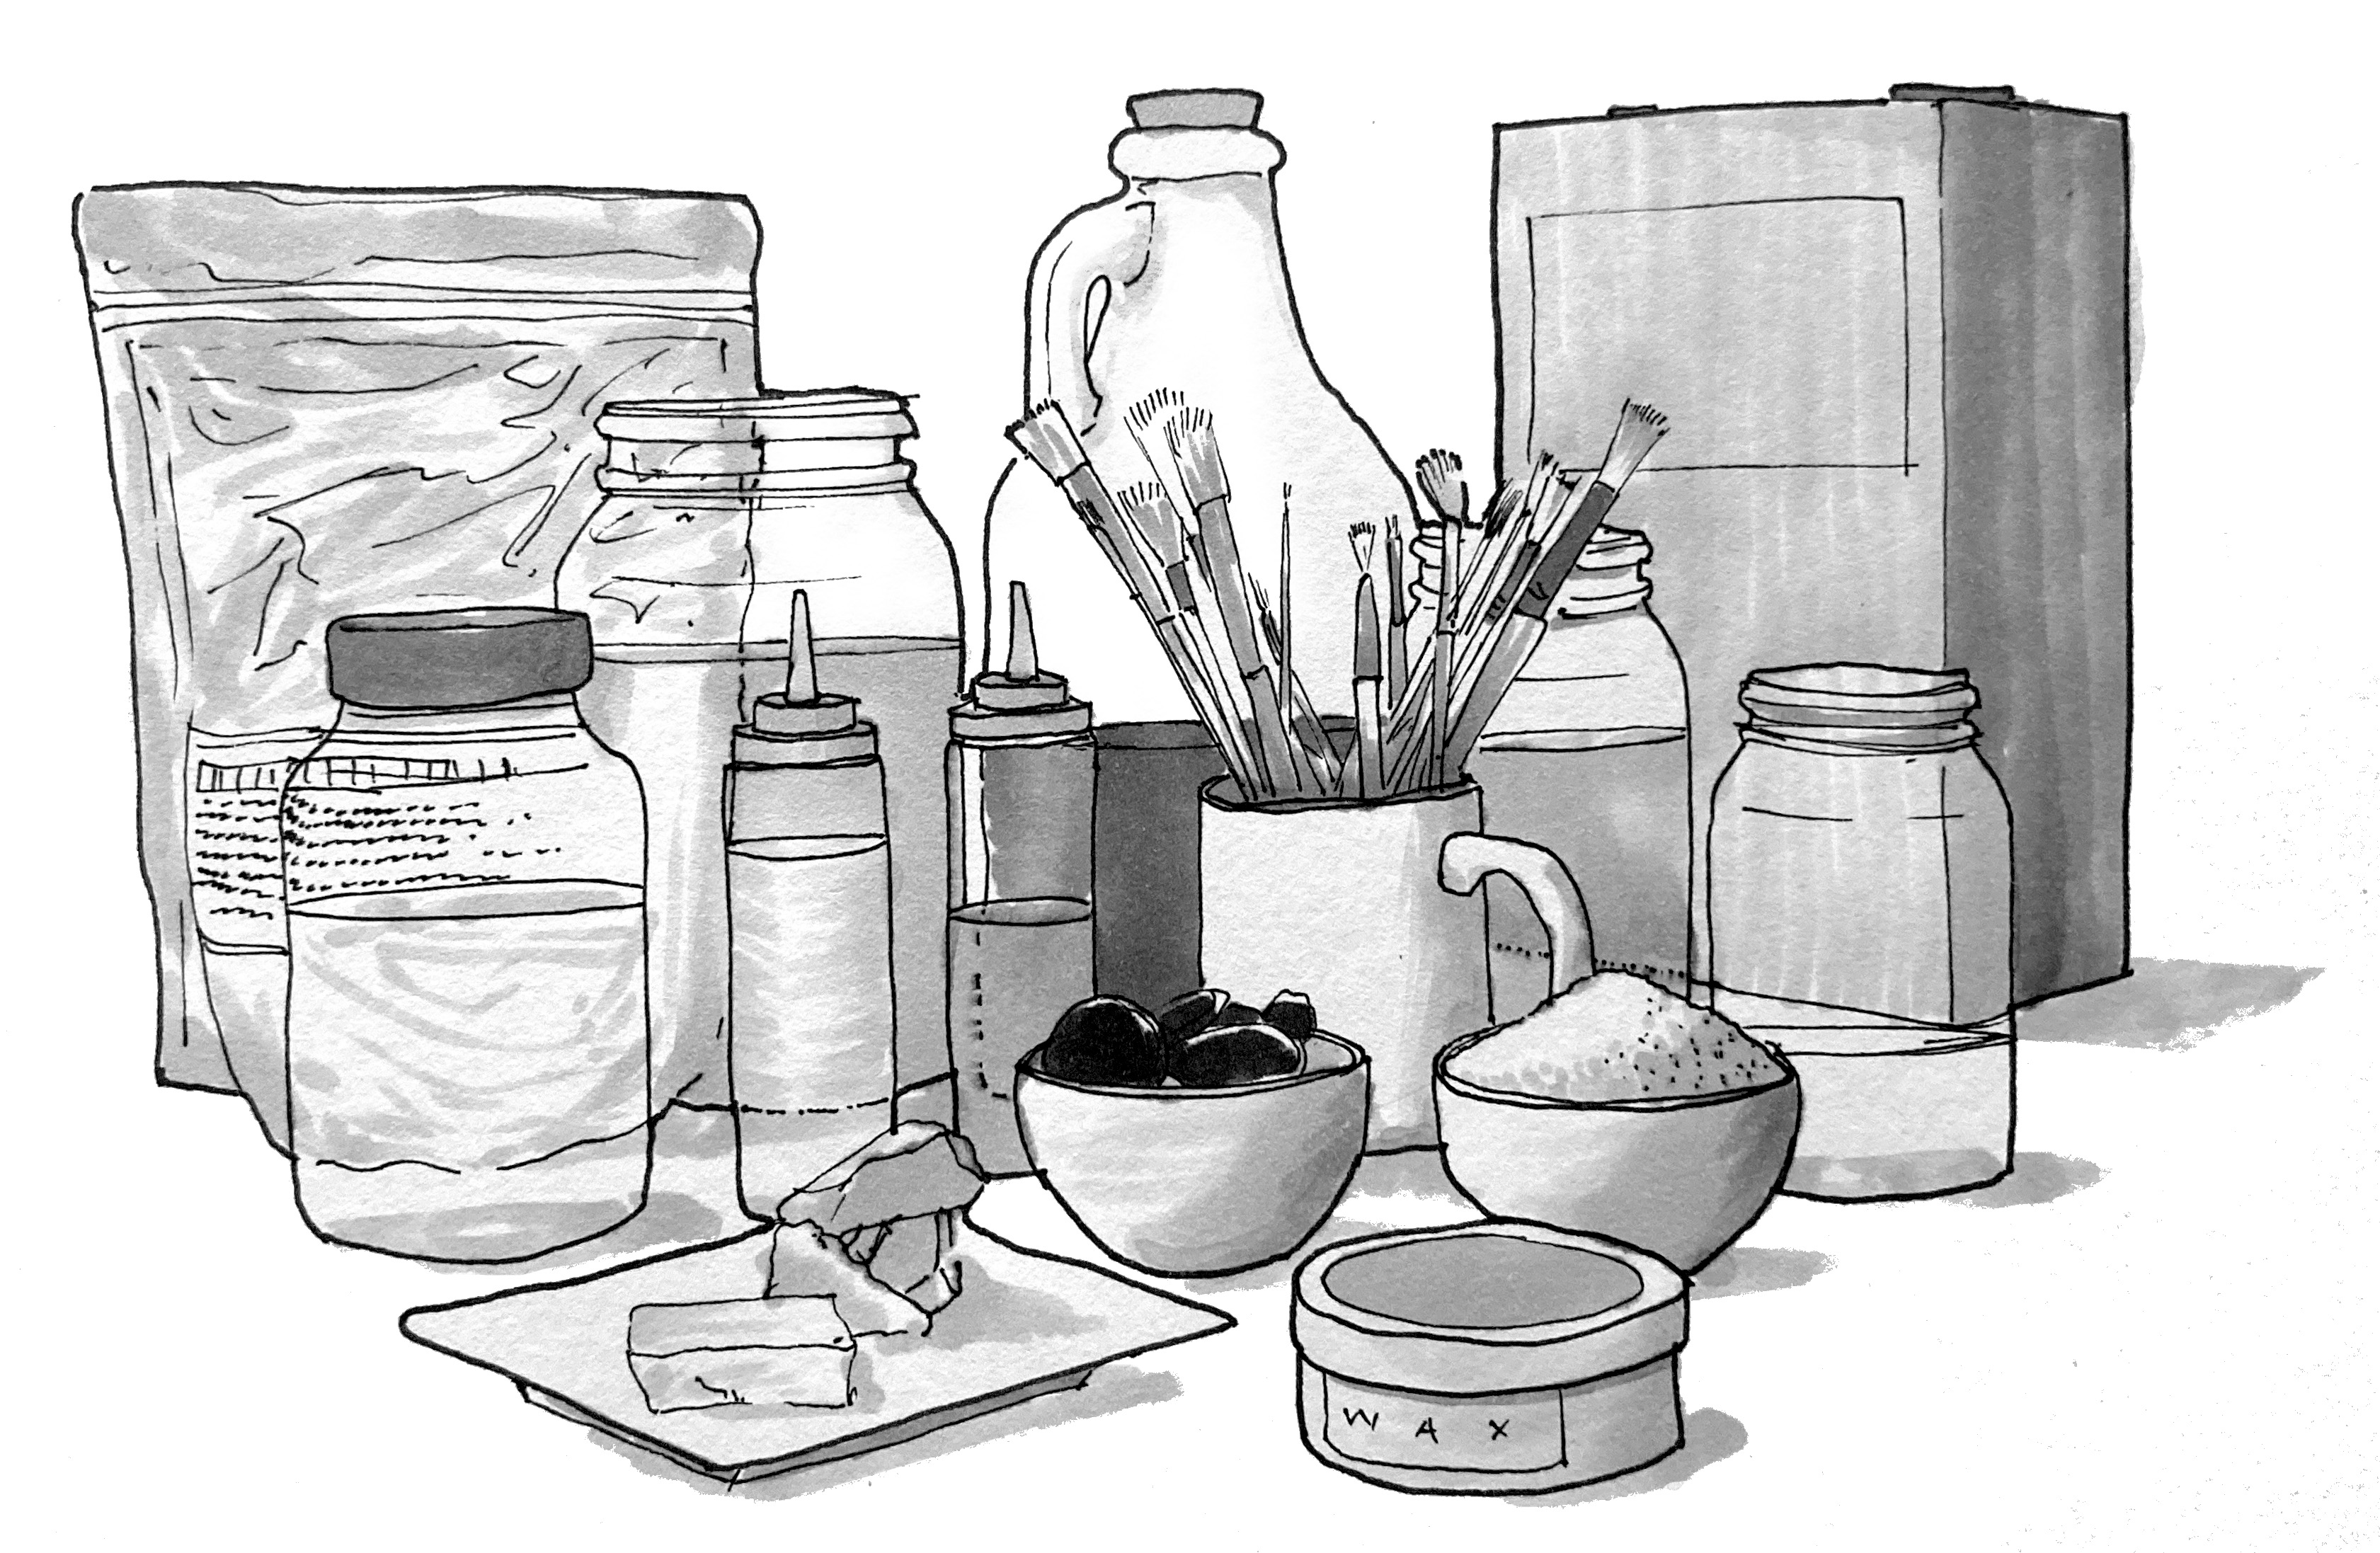 A final illustration of a range of finishing supplies and tools that has been hand-shaded in shades of grey.